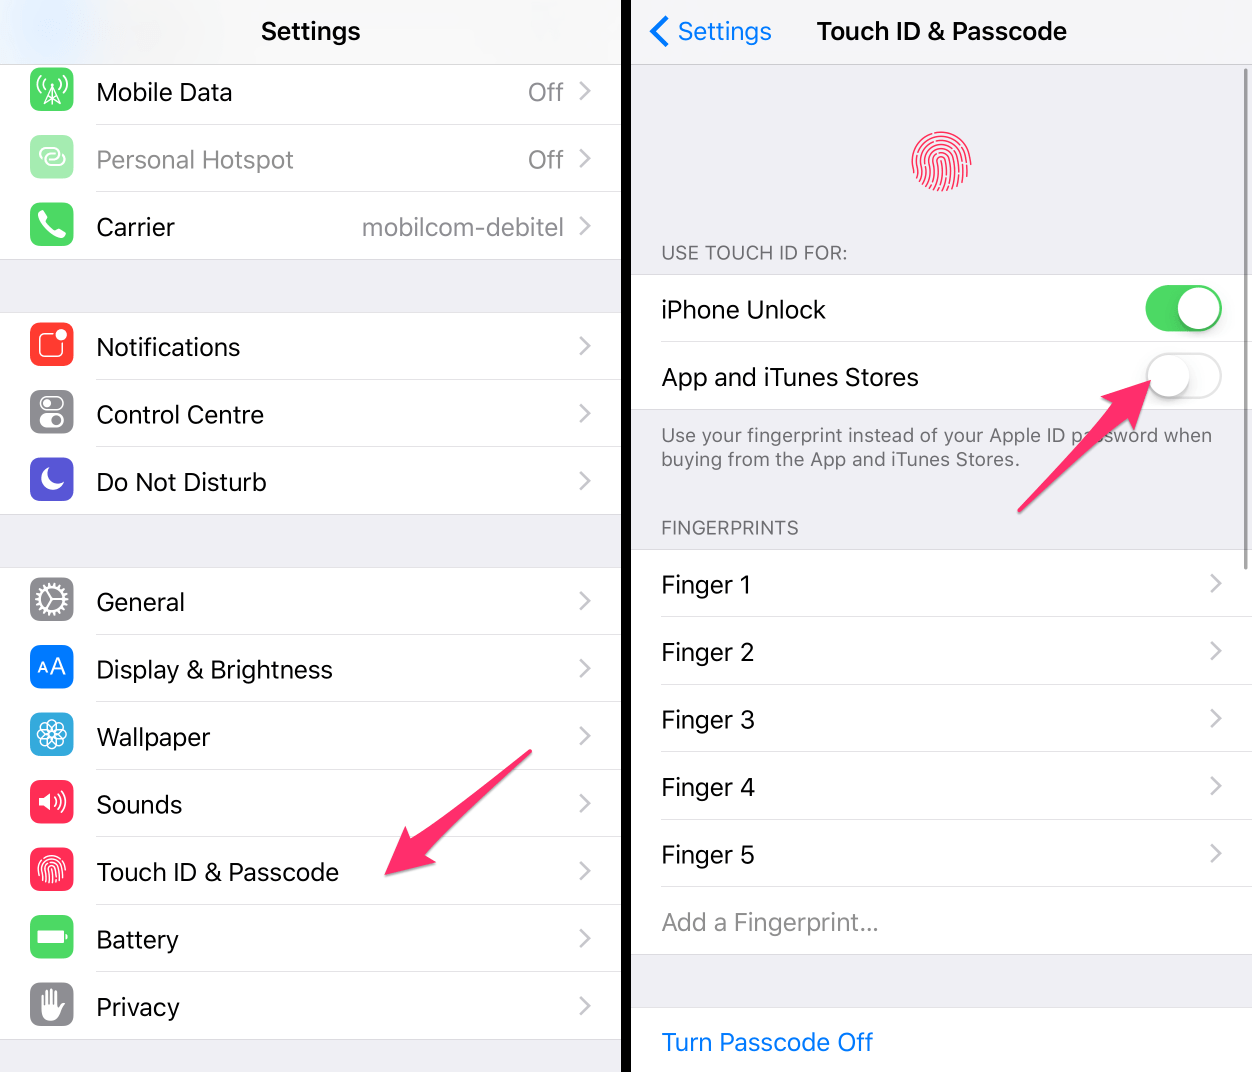 how to download apps on iphone without app store